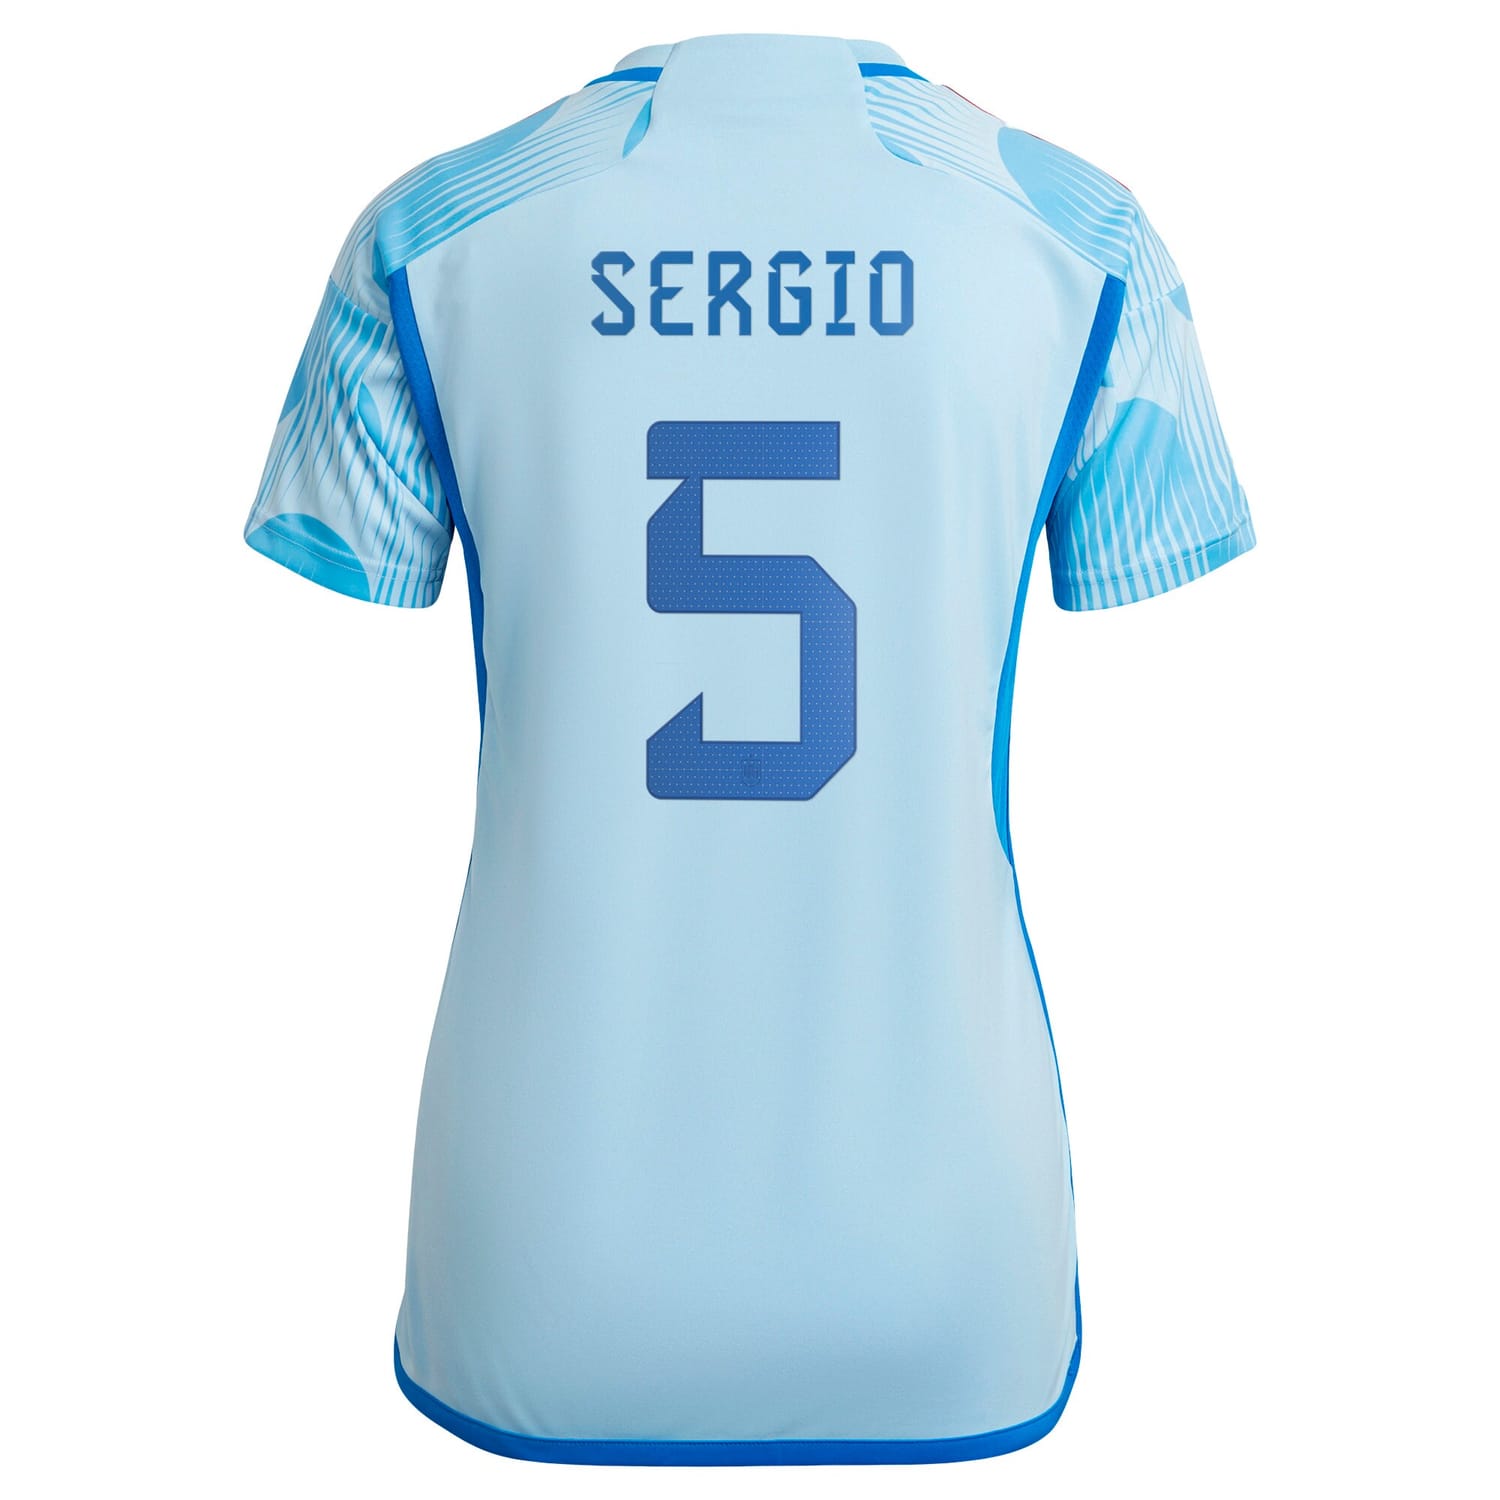 Spain National Team Away Jersey Shirt Blue 2022-23 player Sergio Busquets printing for Women